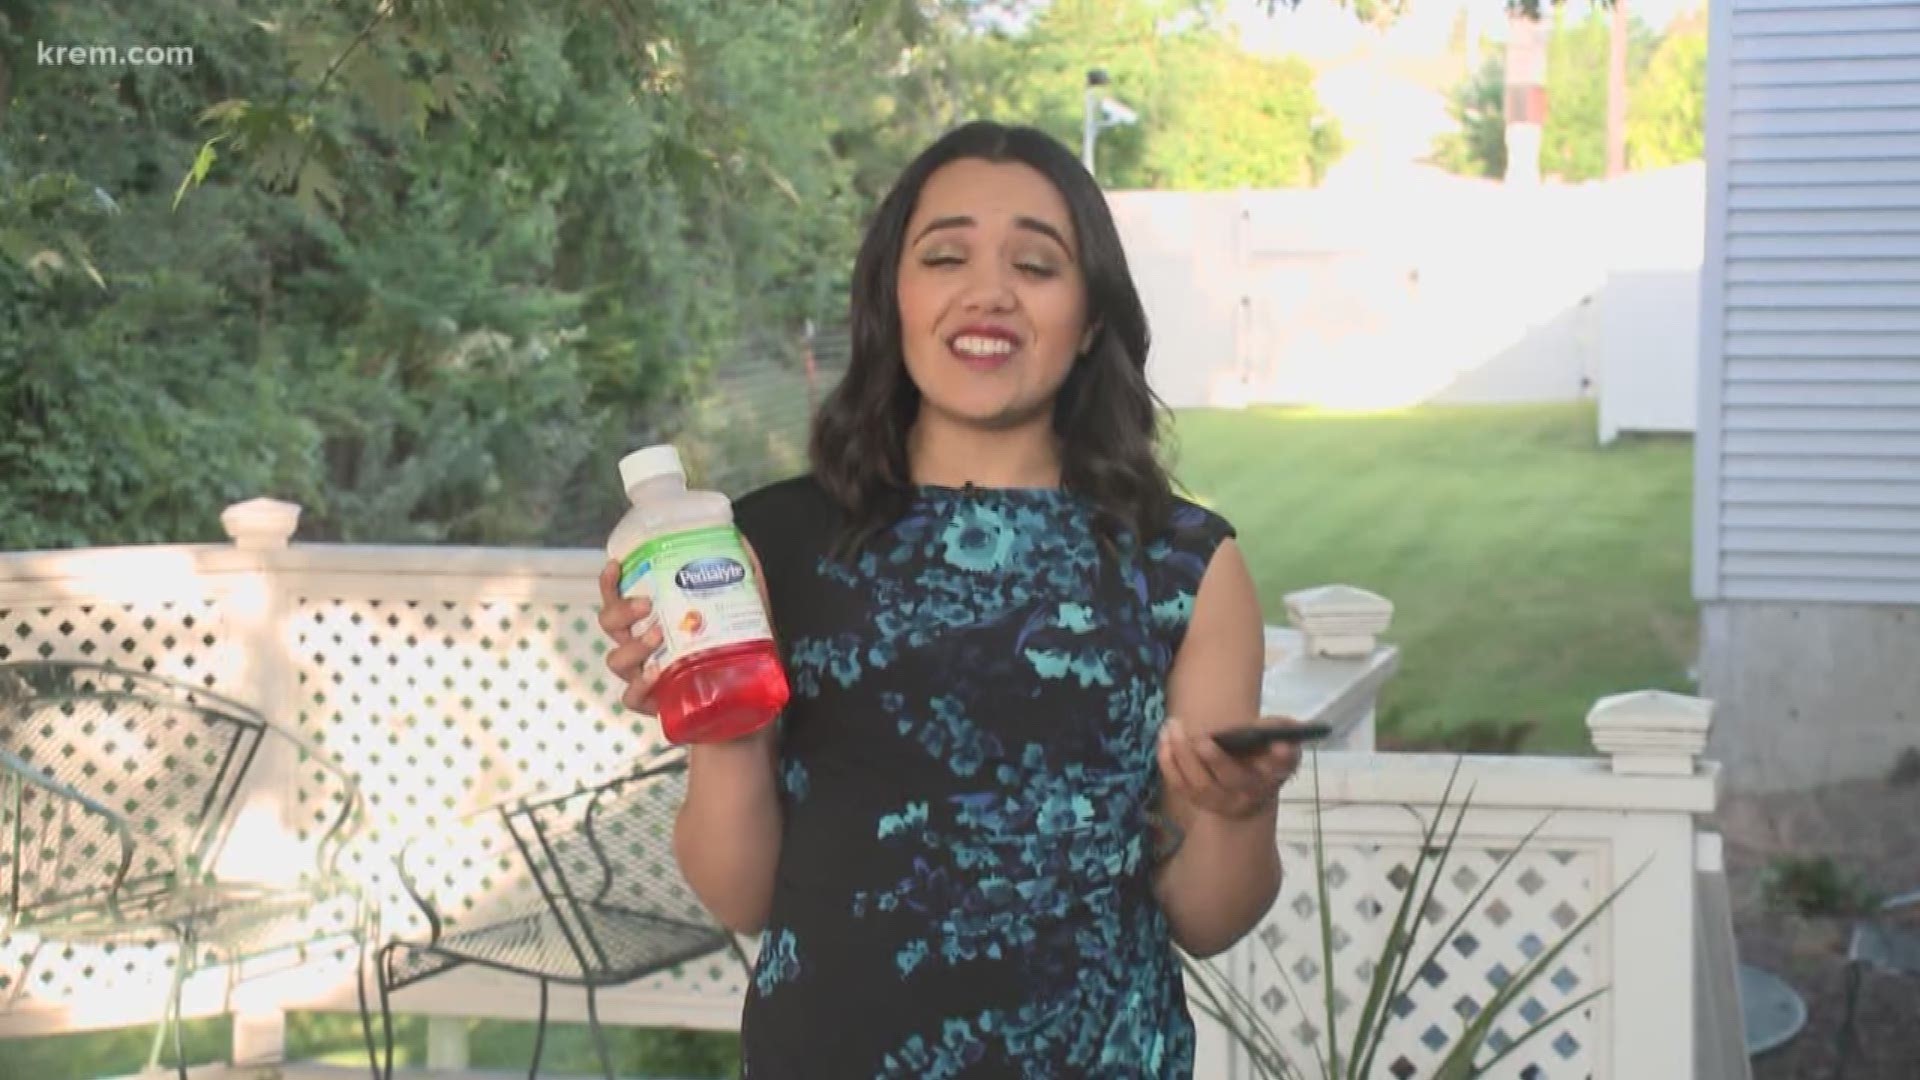 Verify: Can Pedialyte cure your hangover?